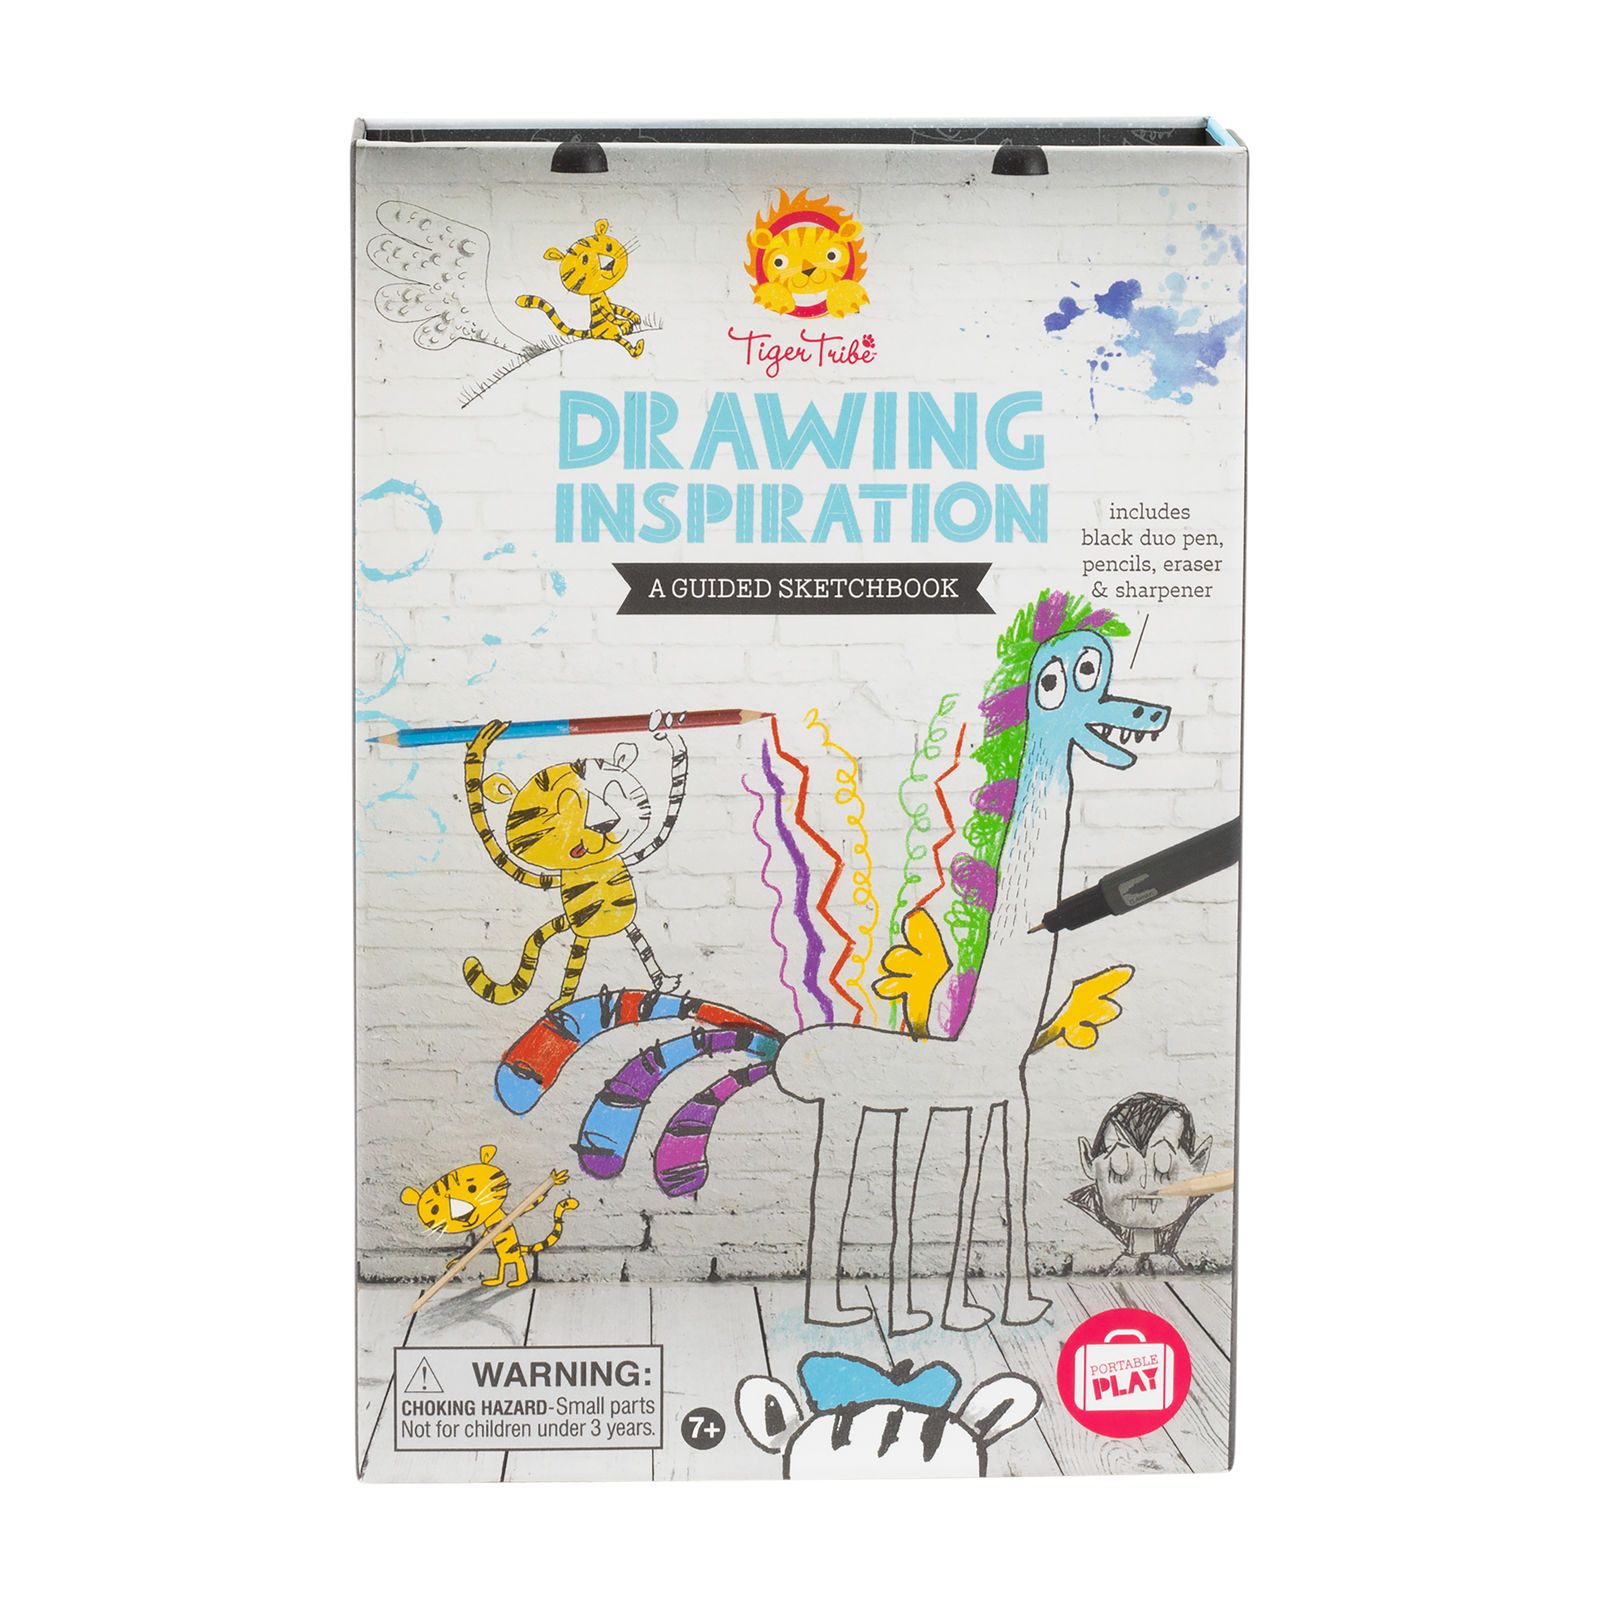 Drawing Inspiration (A Guided Sketchbook)